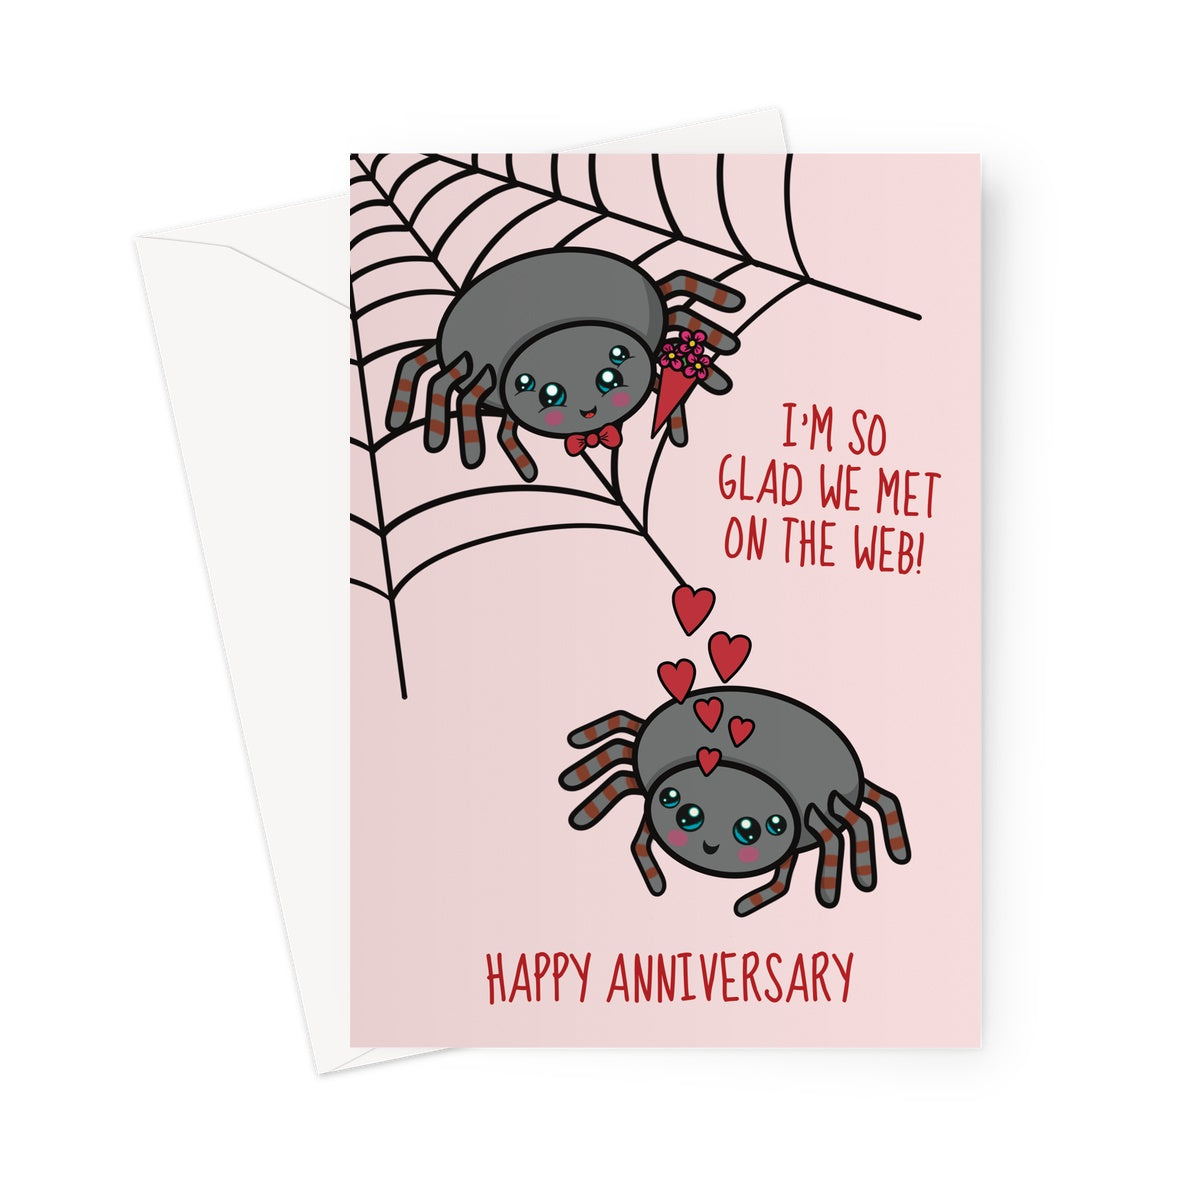 Cute online dating card.